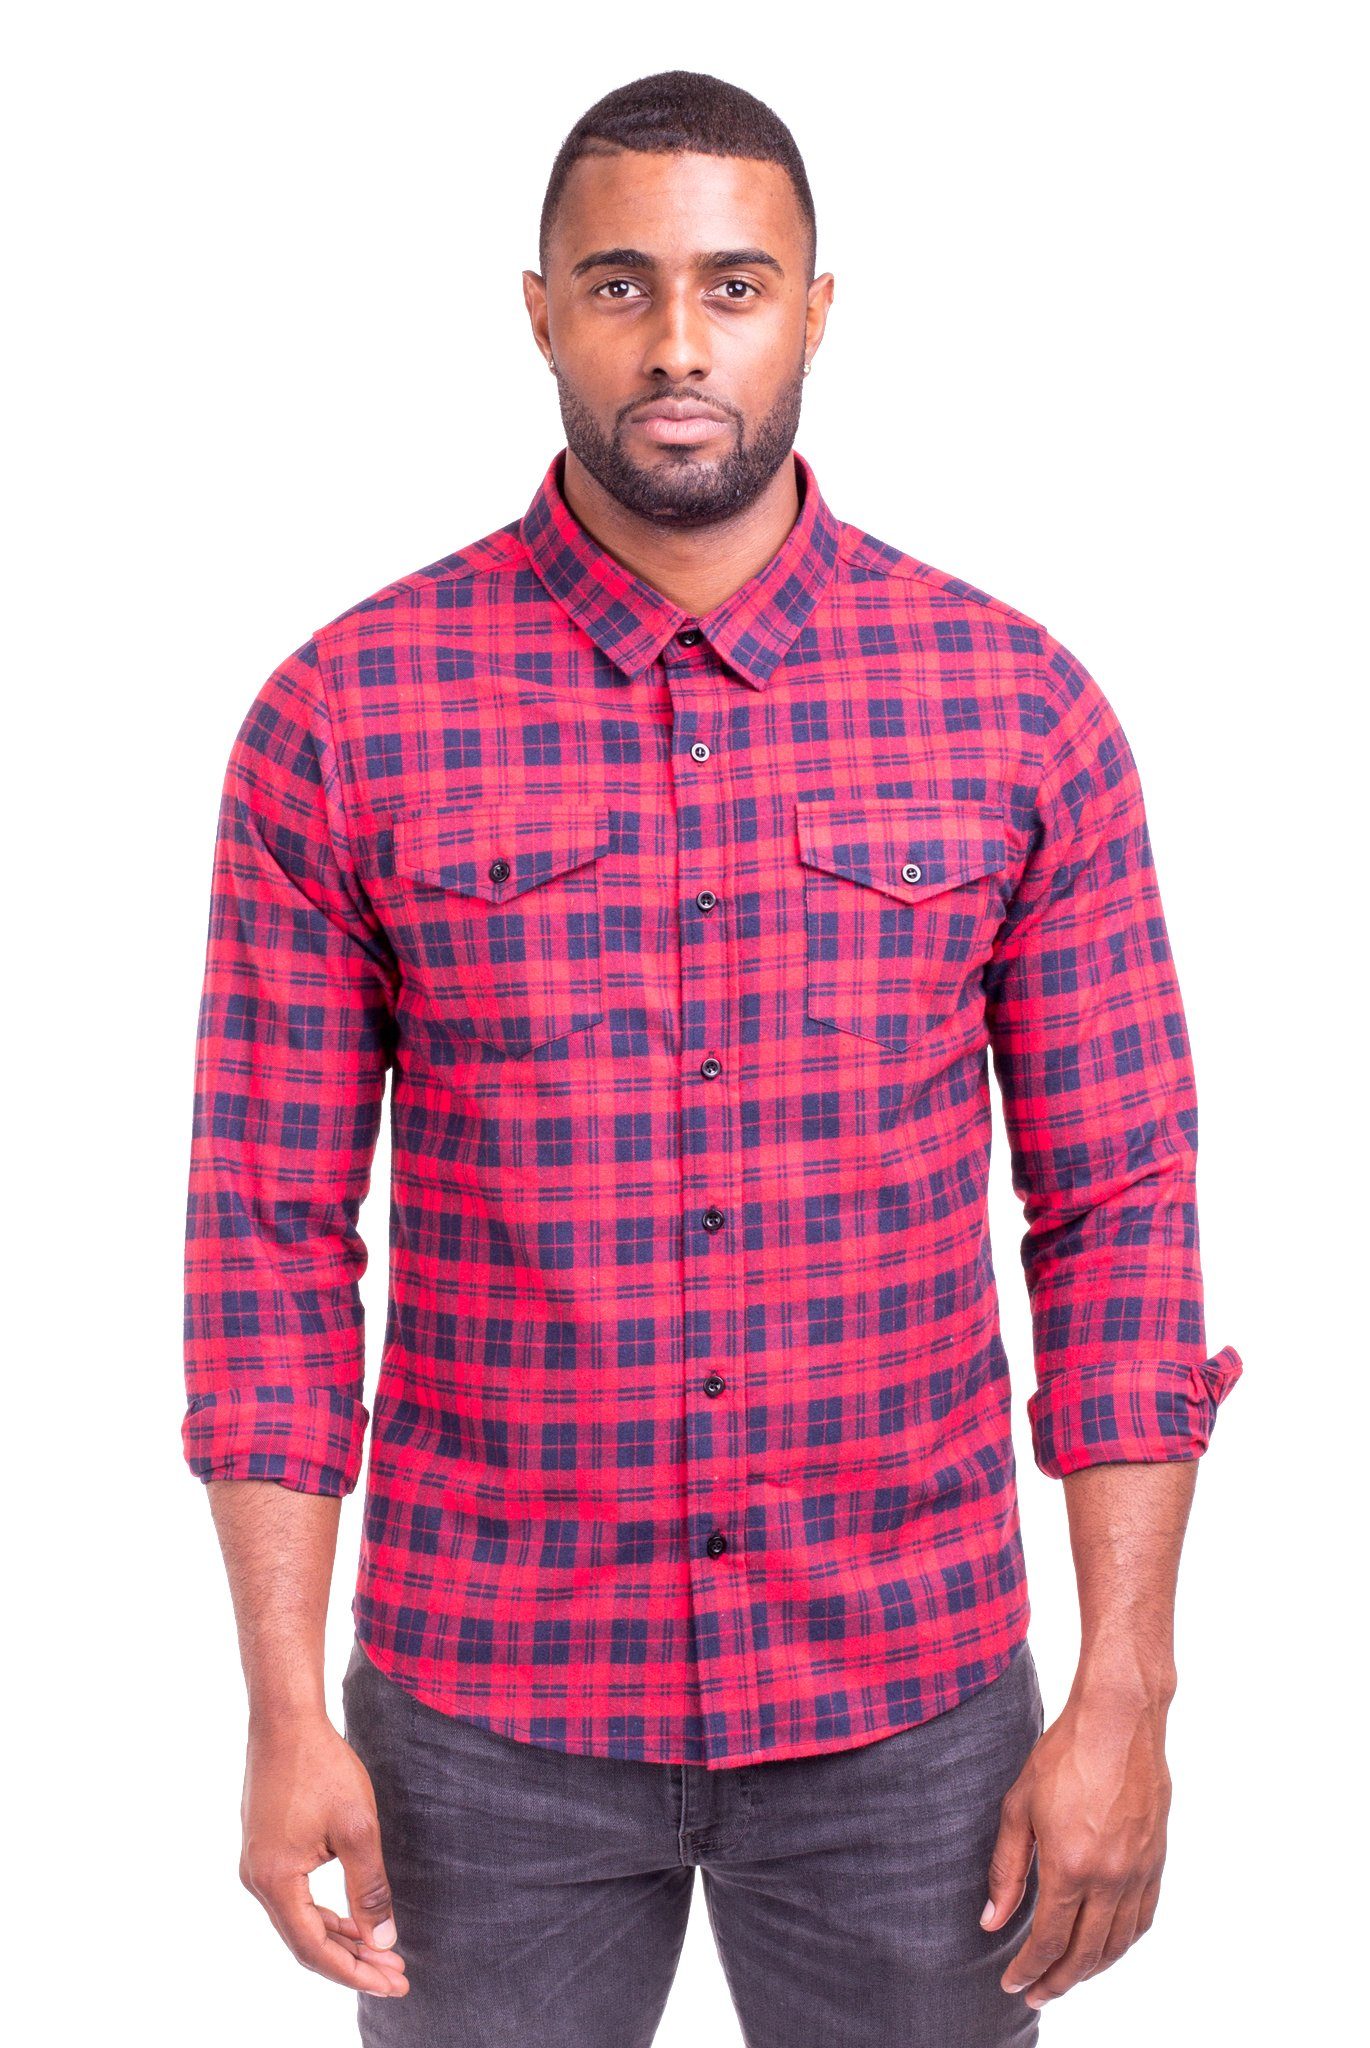 JOHNNY RED/BLUE PLAID FLANNEL | Poor Little Boy Clothing